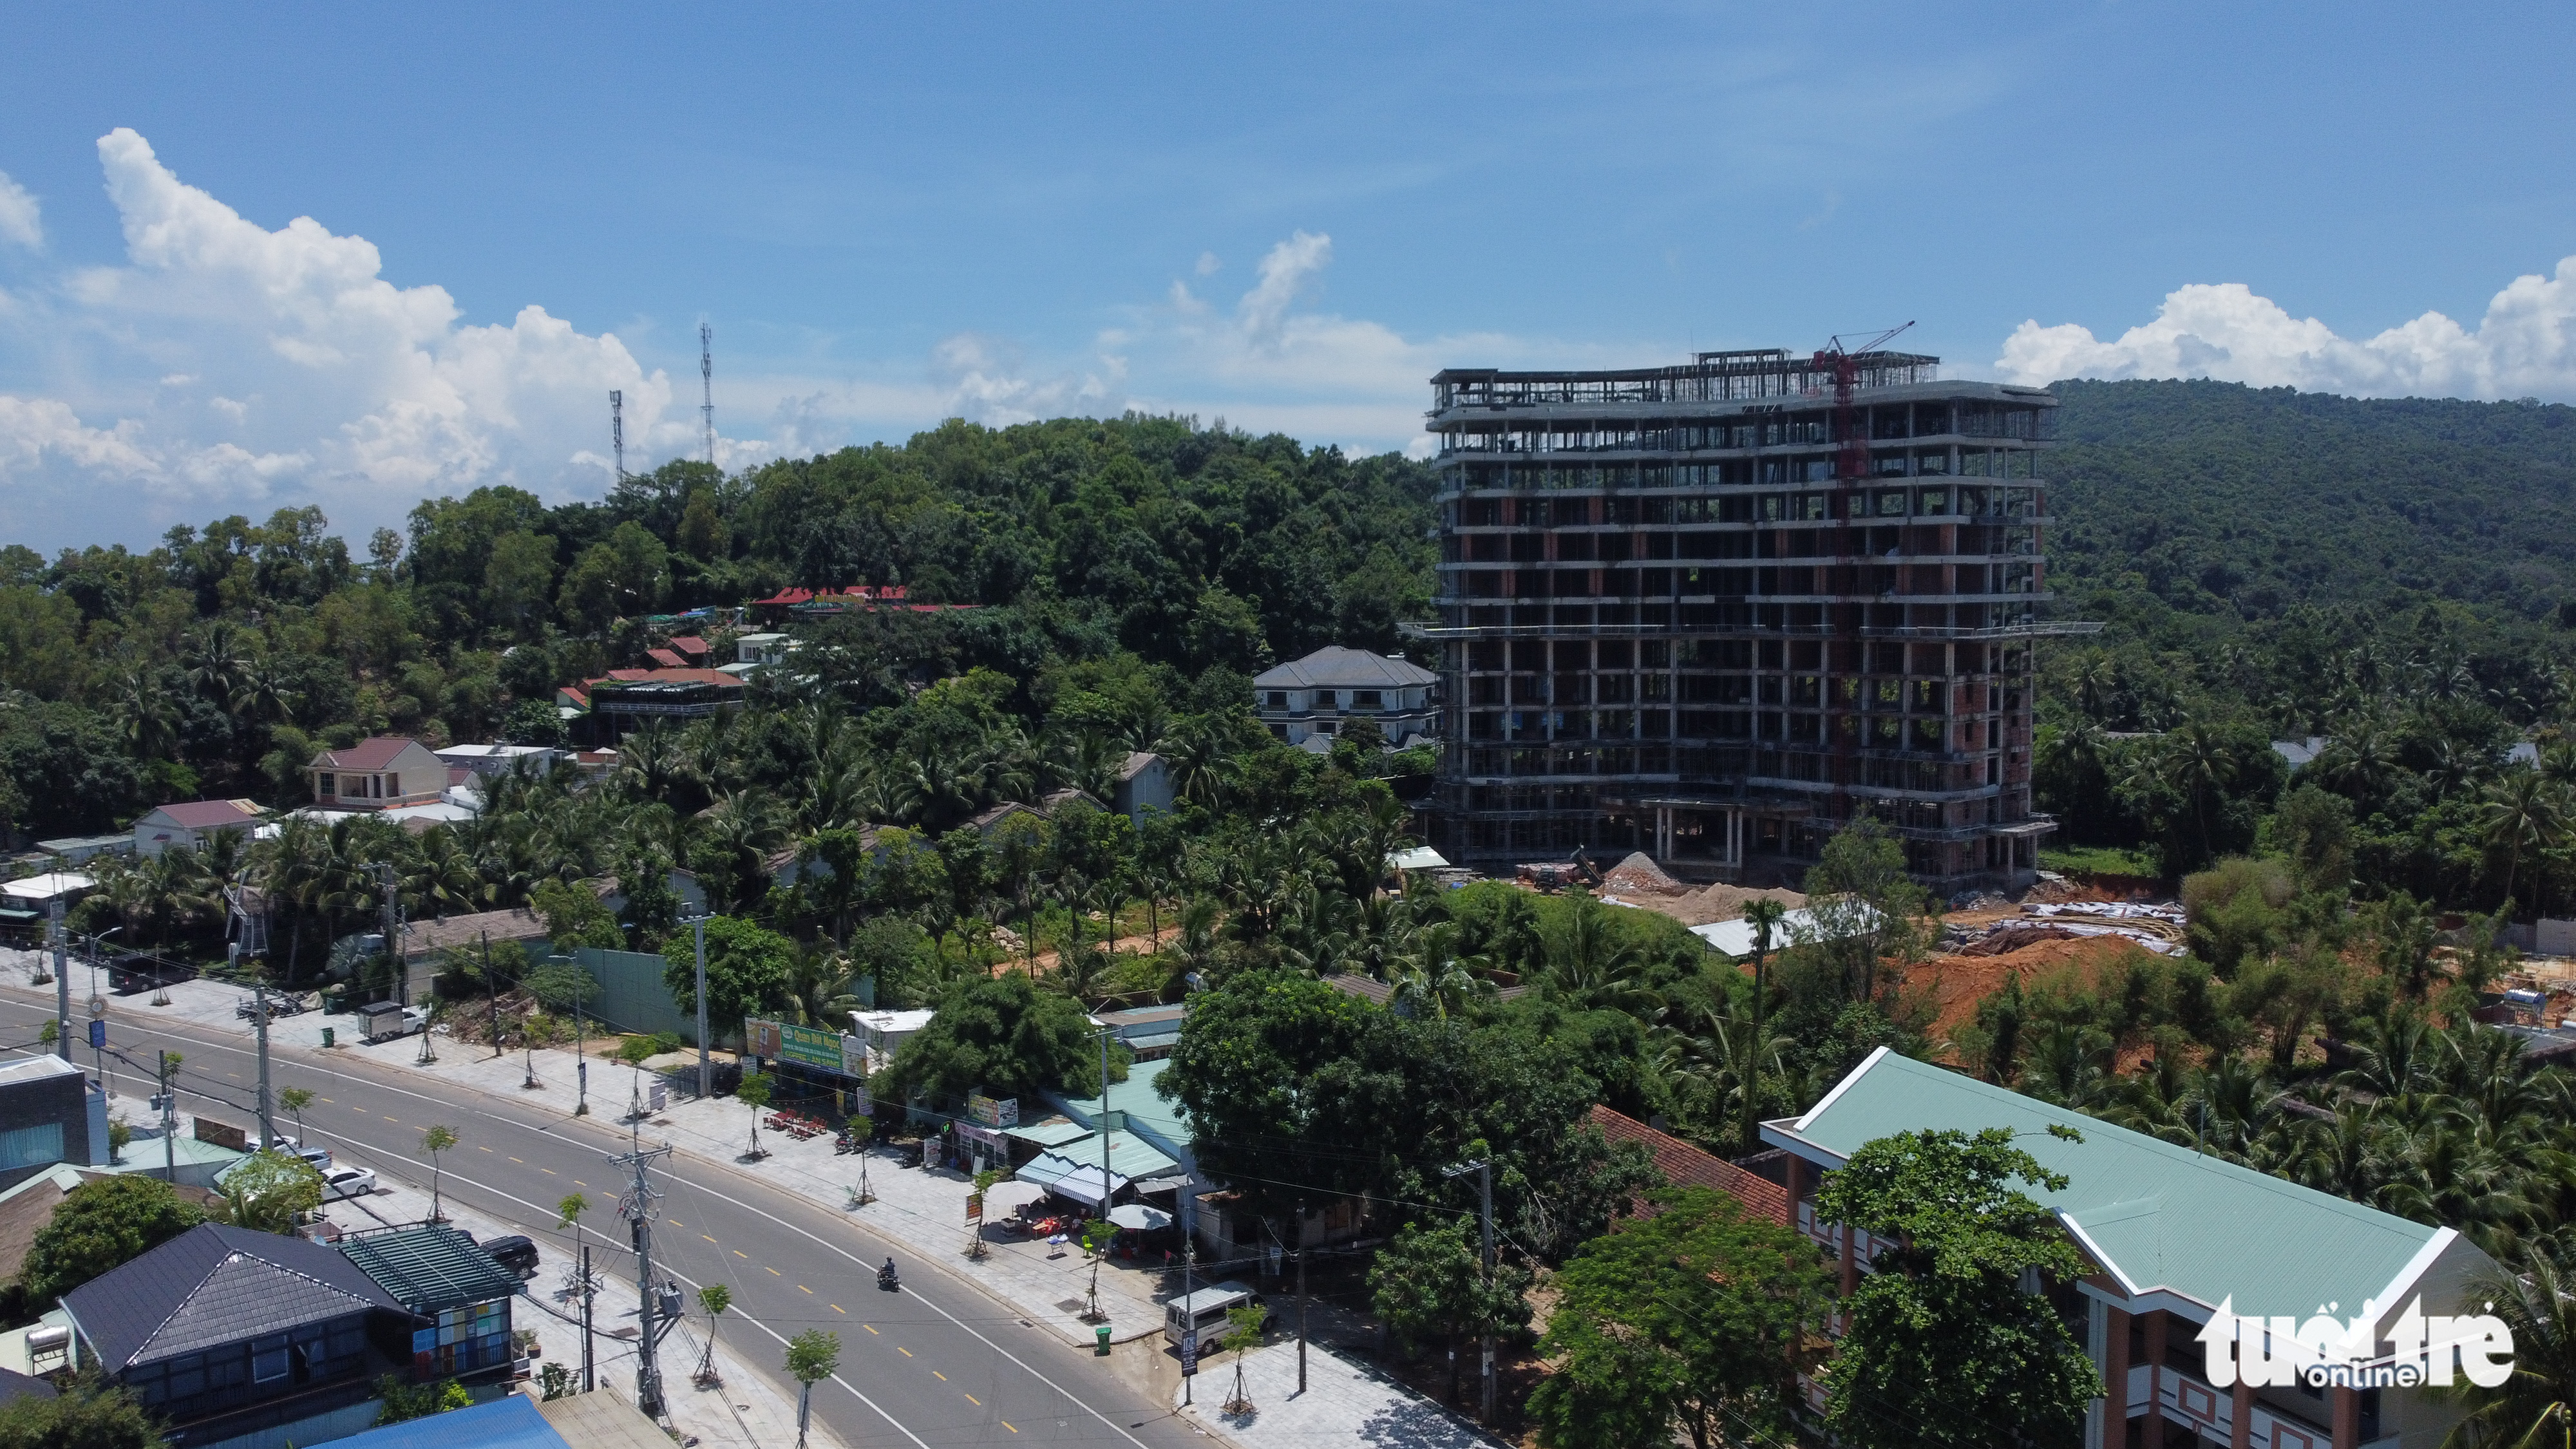 Phu Quoc authorities order demolition of illegal 12-story hotel